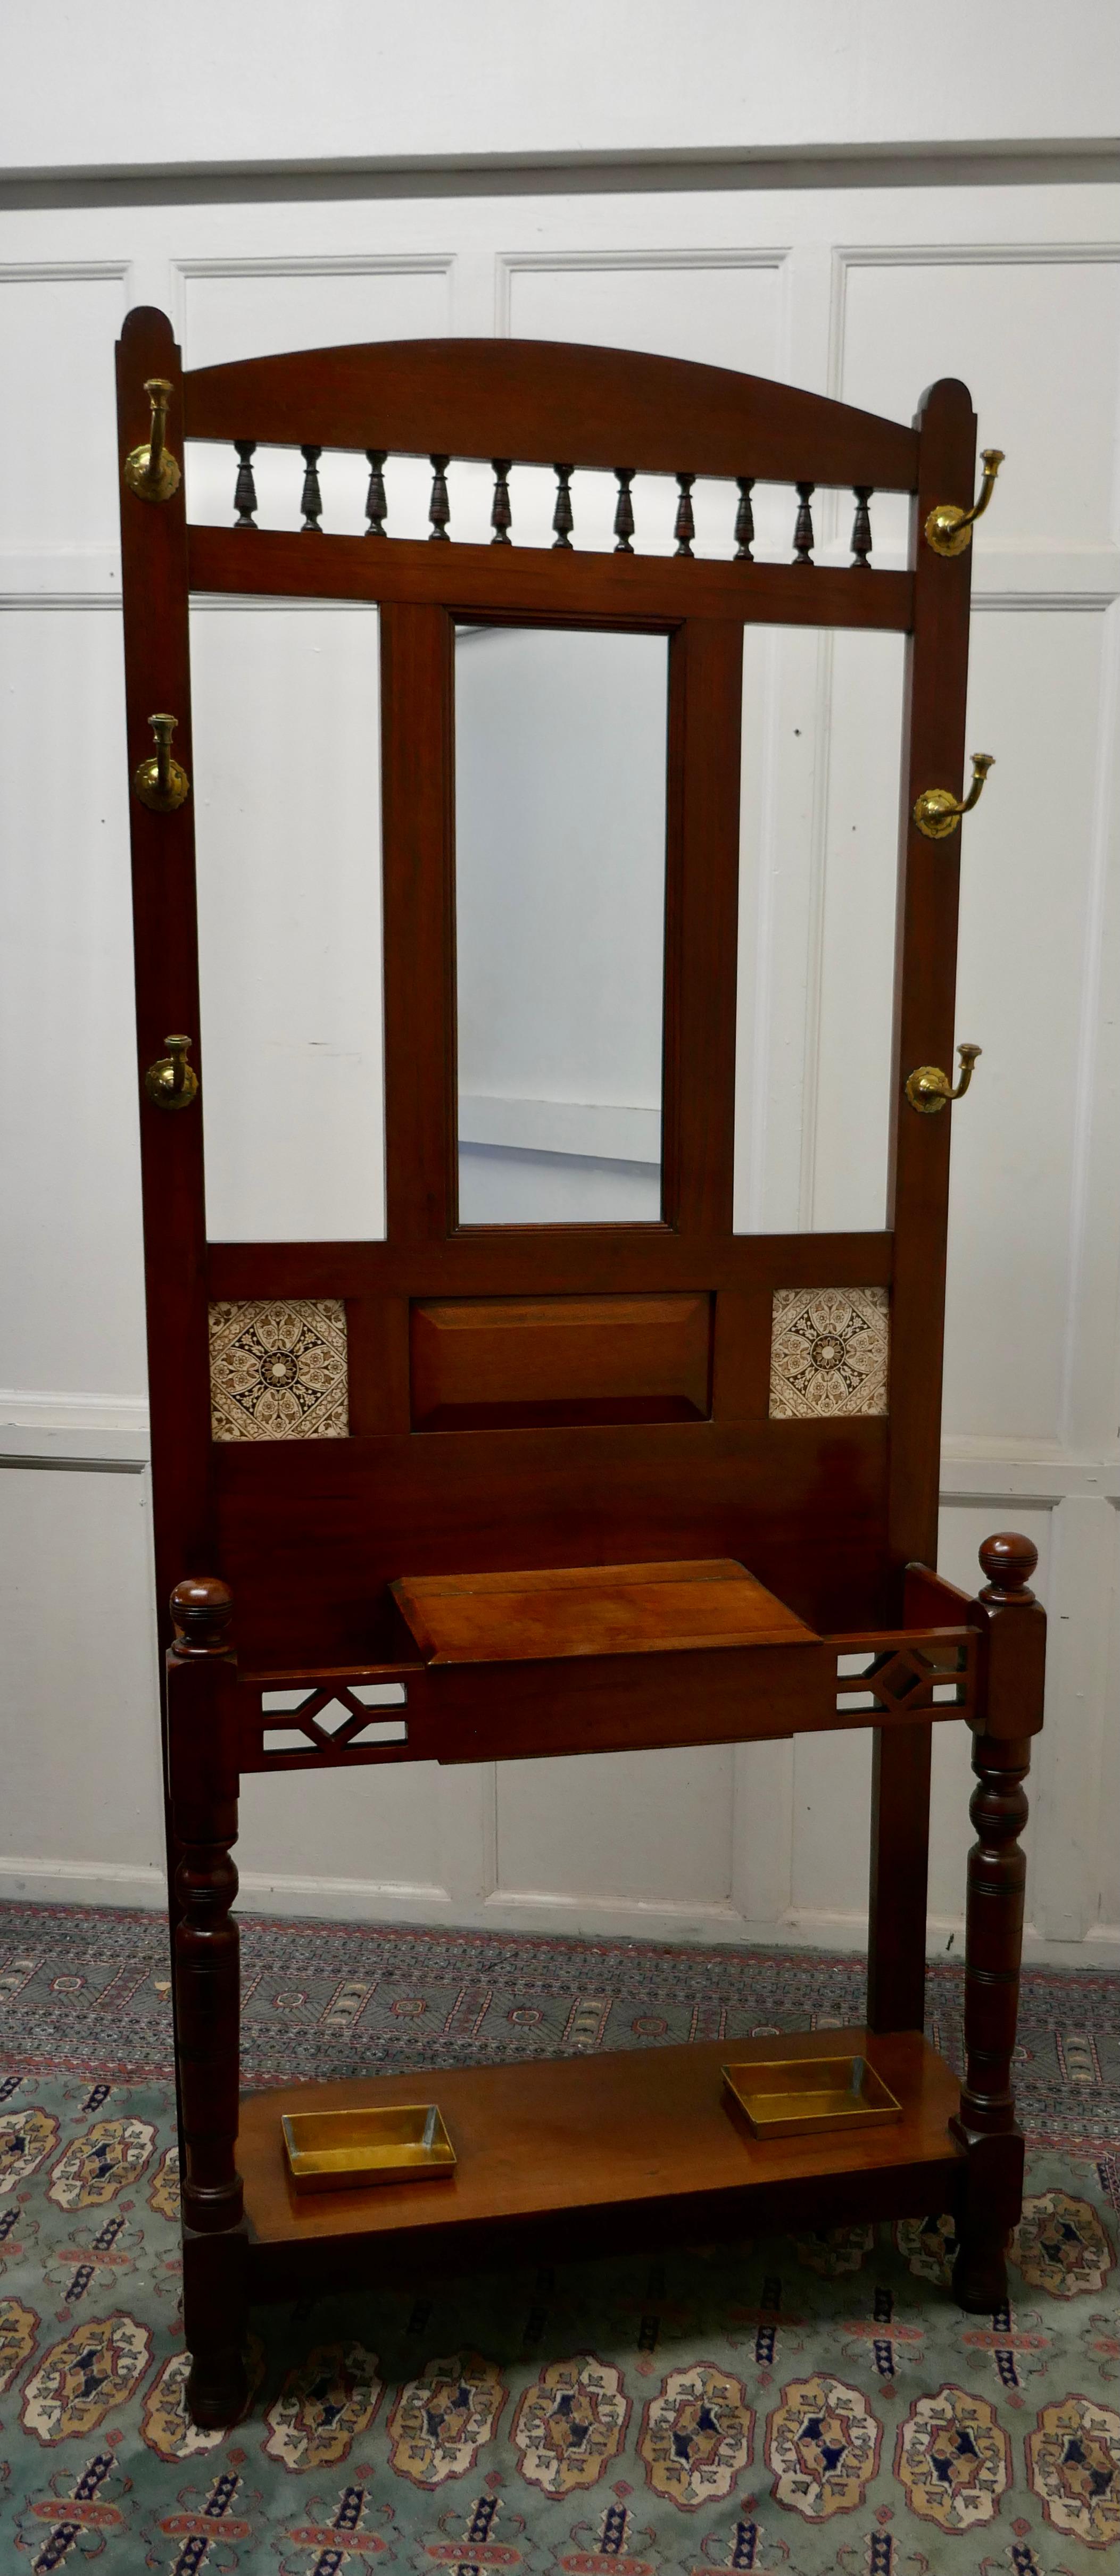 Victorian Mahogany hall stand 

This is a handsome piece, the stand has a central mirror, 6 brass coat/hat hooks and central closing glove box 

The upper section has attractive Victorian Tiles, and the lower section has brass drip trays for